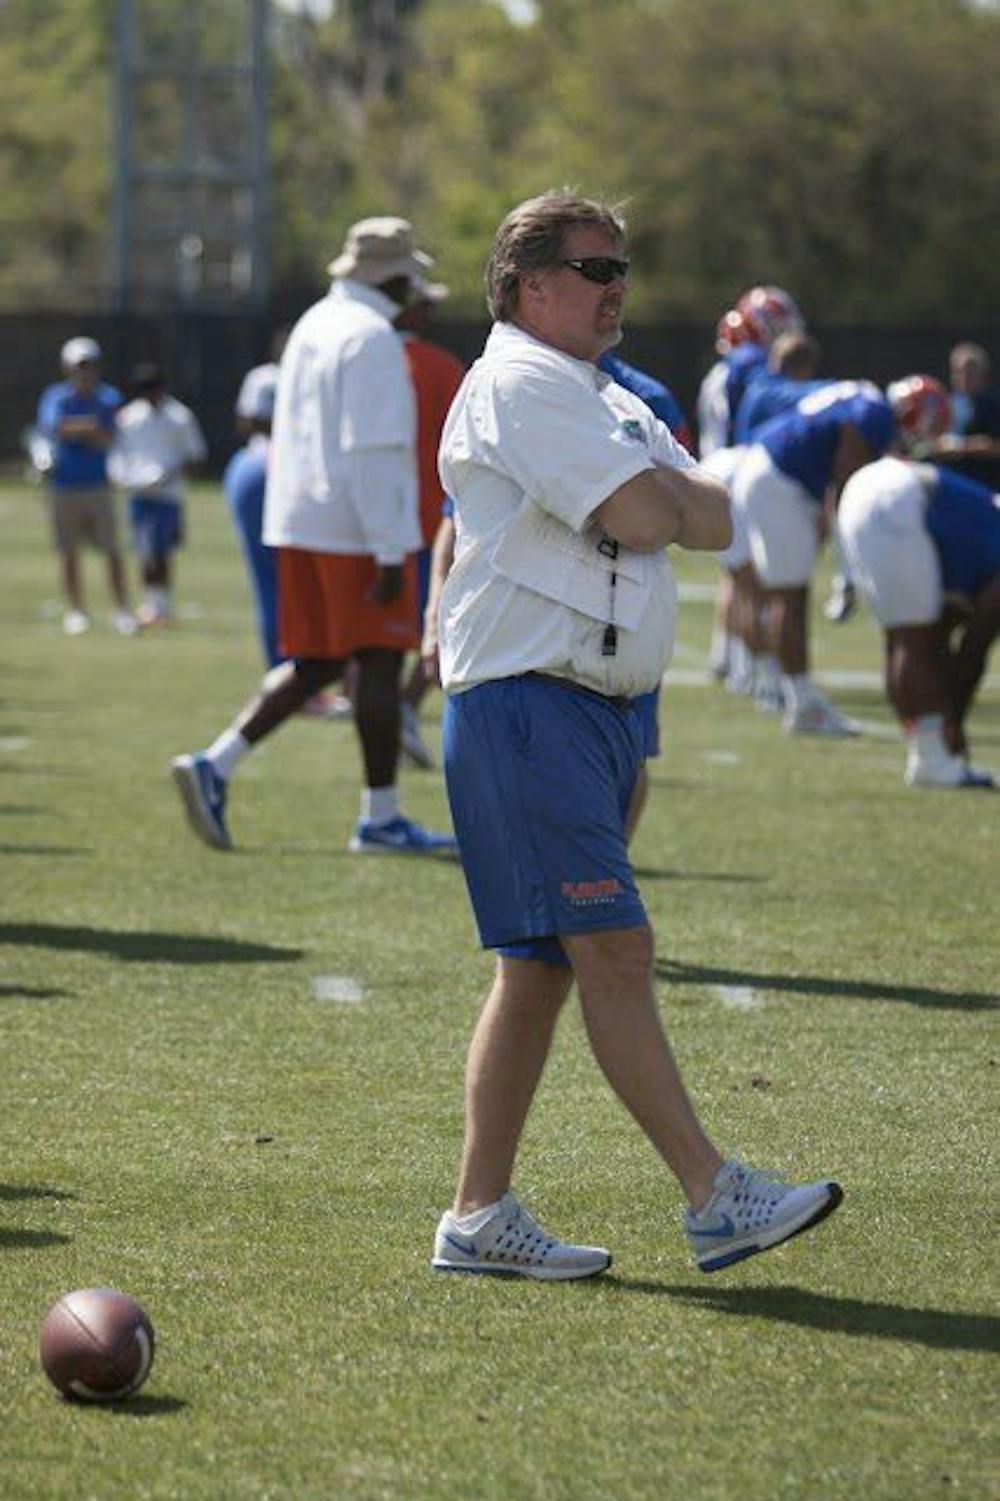 <p>UF Jim McElwain walks between rows of players during a spring practice at the Sanders Practice Field on March 22, 2017.&nbsp;</p>